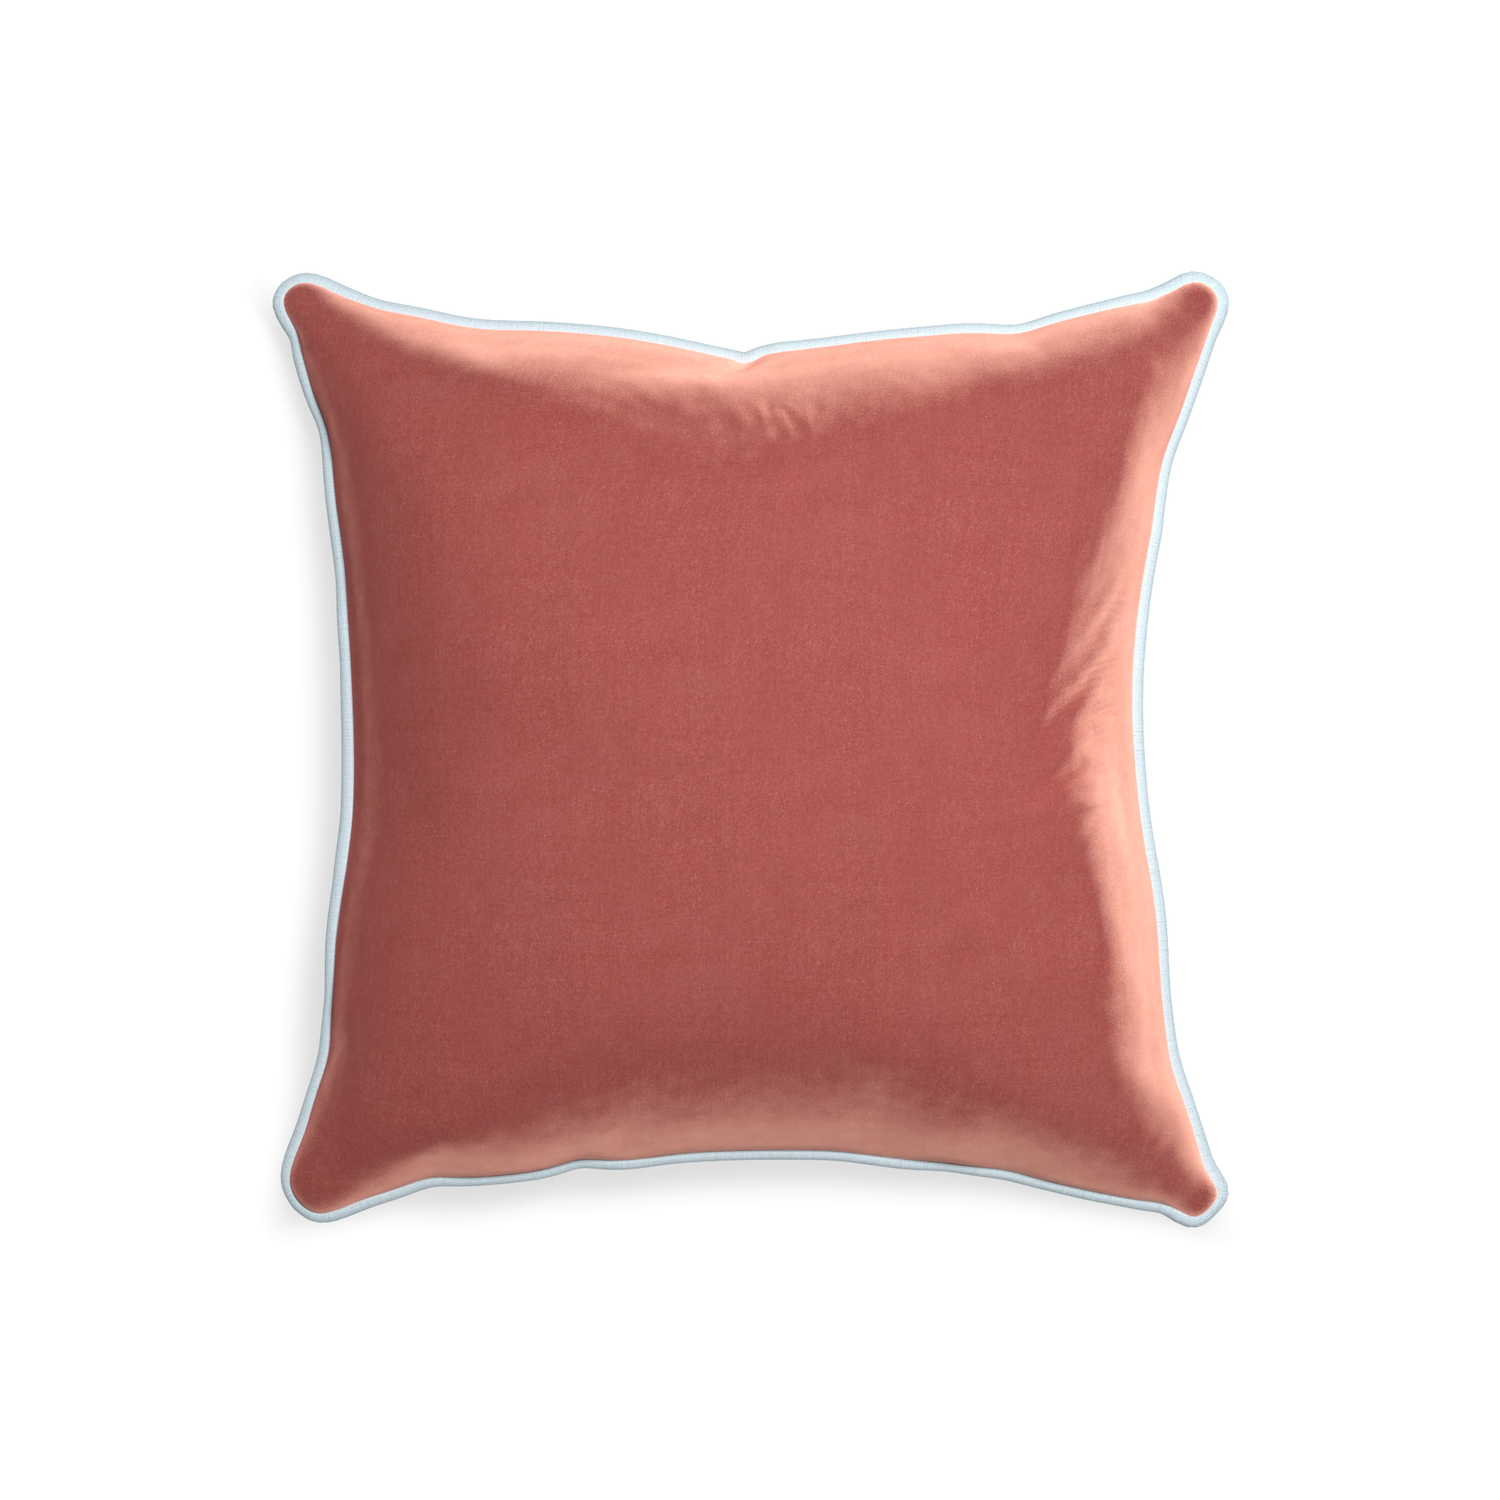 20-square cosmo velvet custom pillow with powder piping on white background